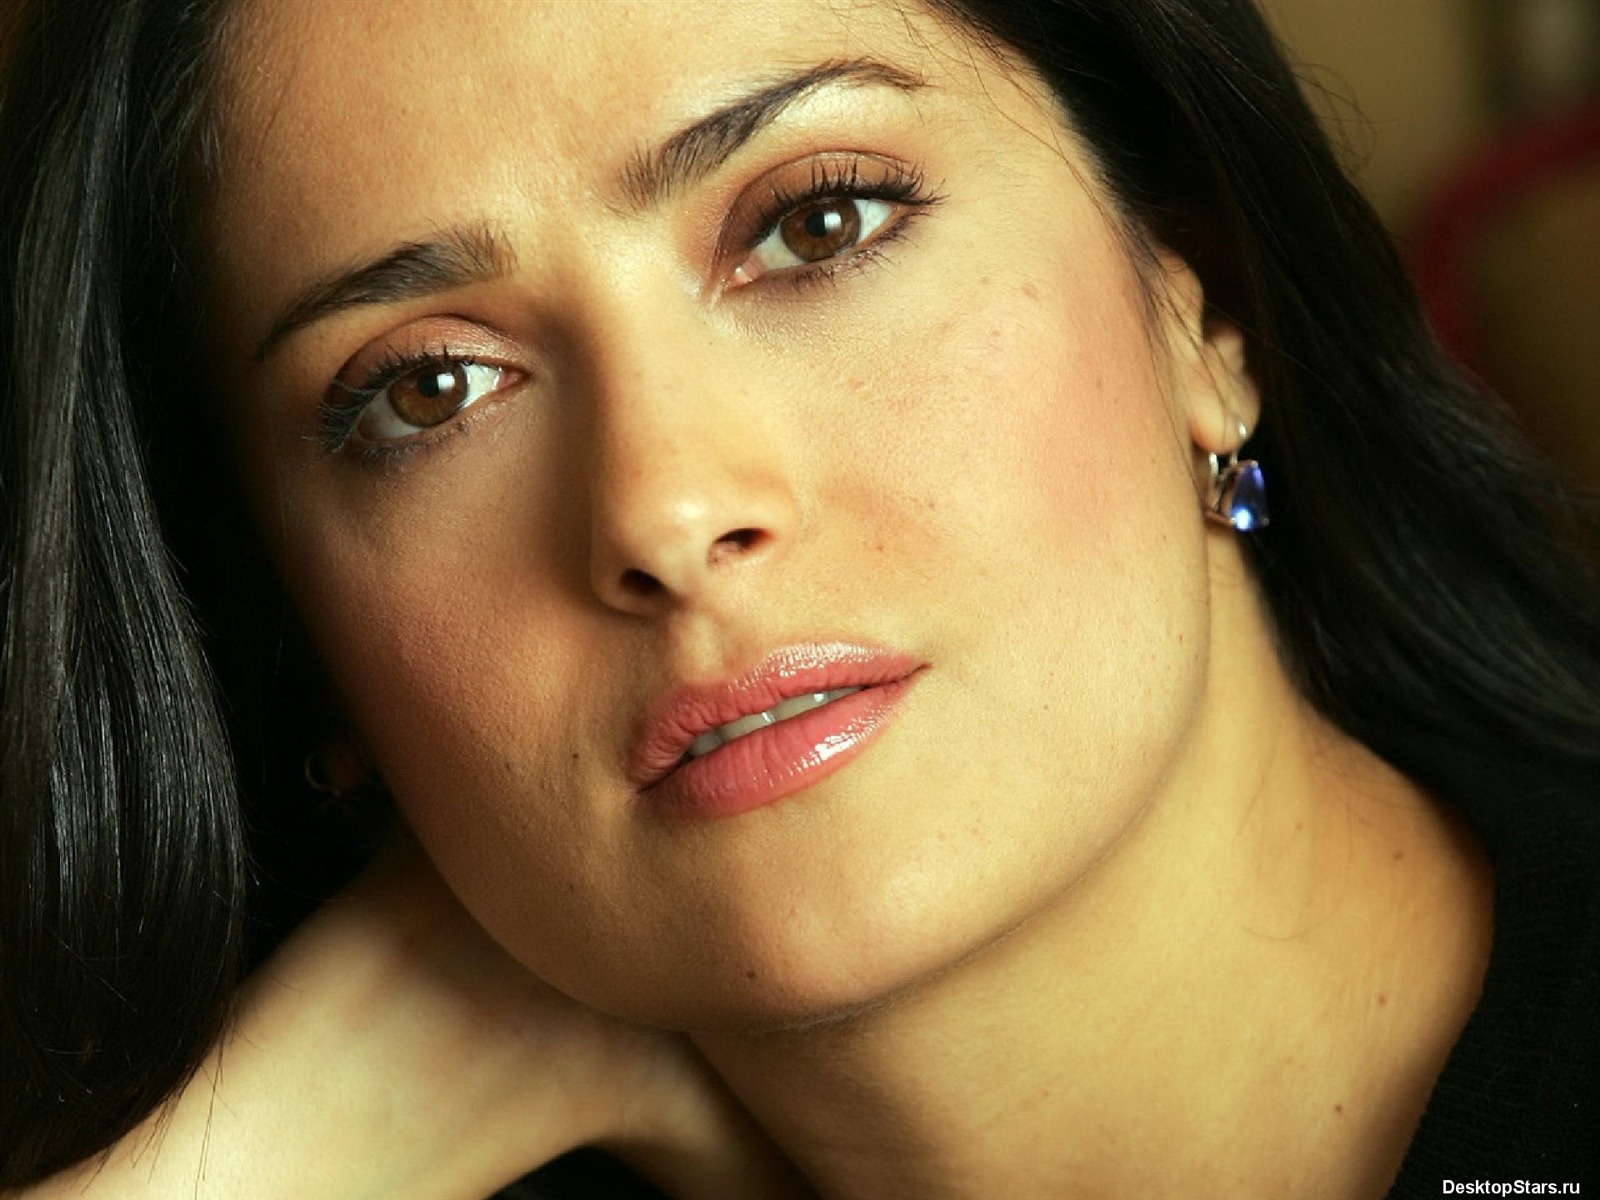 Salma Hayek #027 - 1600x1200 Wallpapers Pictures Photos Images